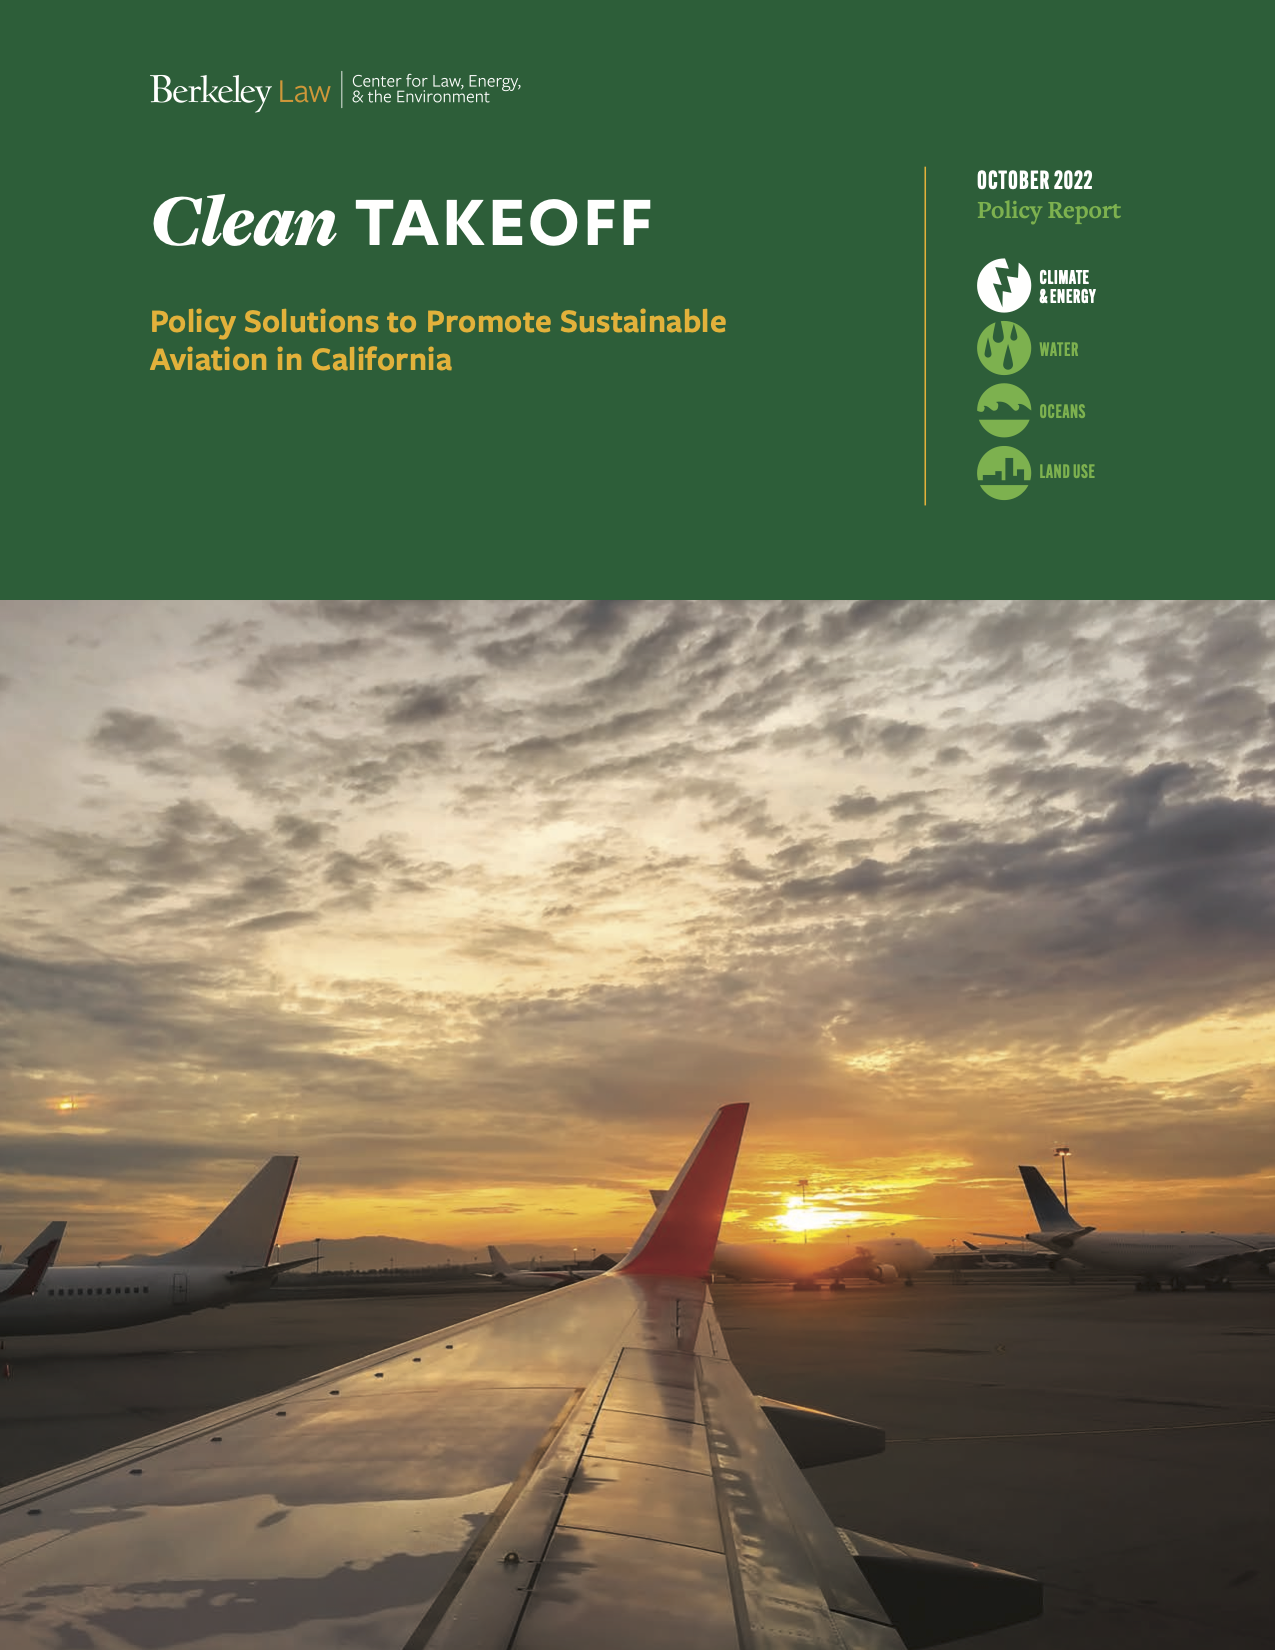 Berkeley Law, Center for Law, Energy, and the Environment, Clean Takeoff Policy Solutions to Promote Sustainable Aviation in California